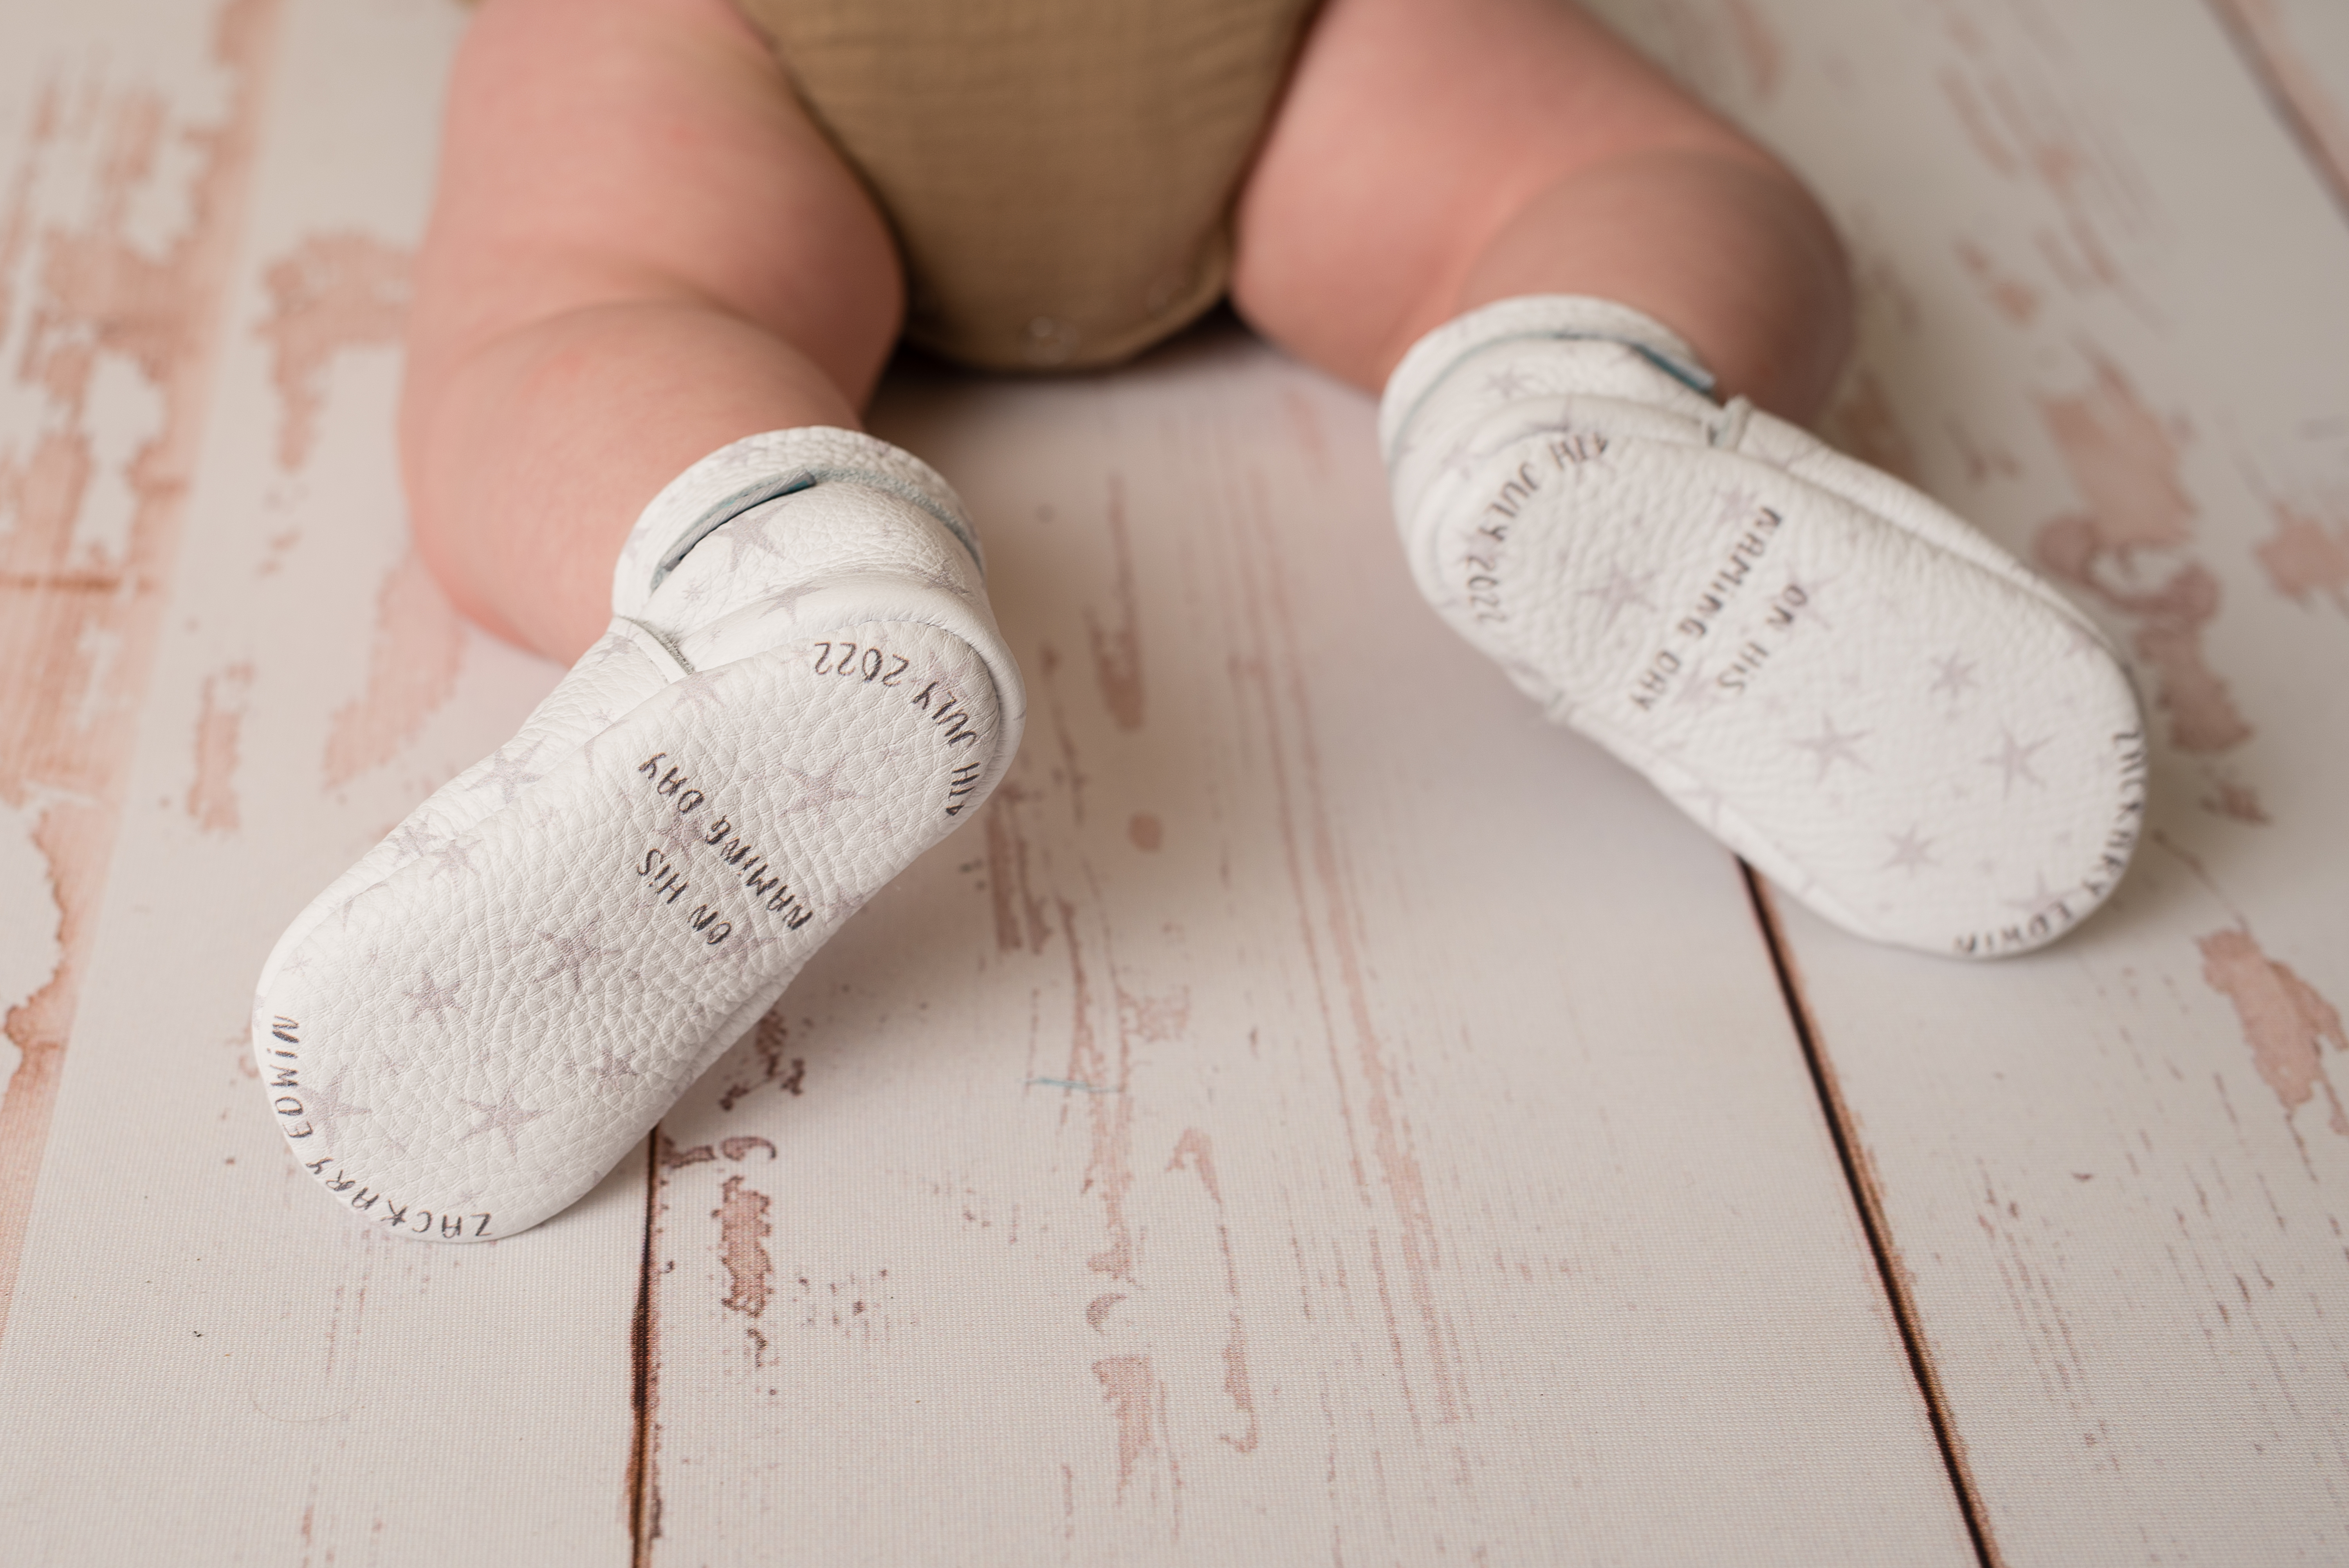 Baby Shower Gift Guide: The Best Presents for New Parents